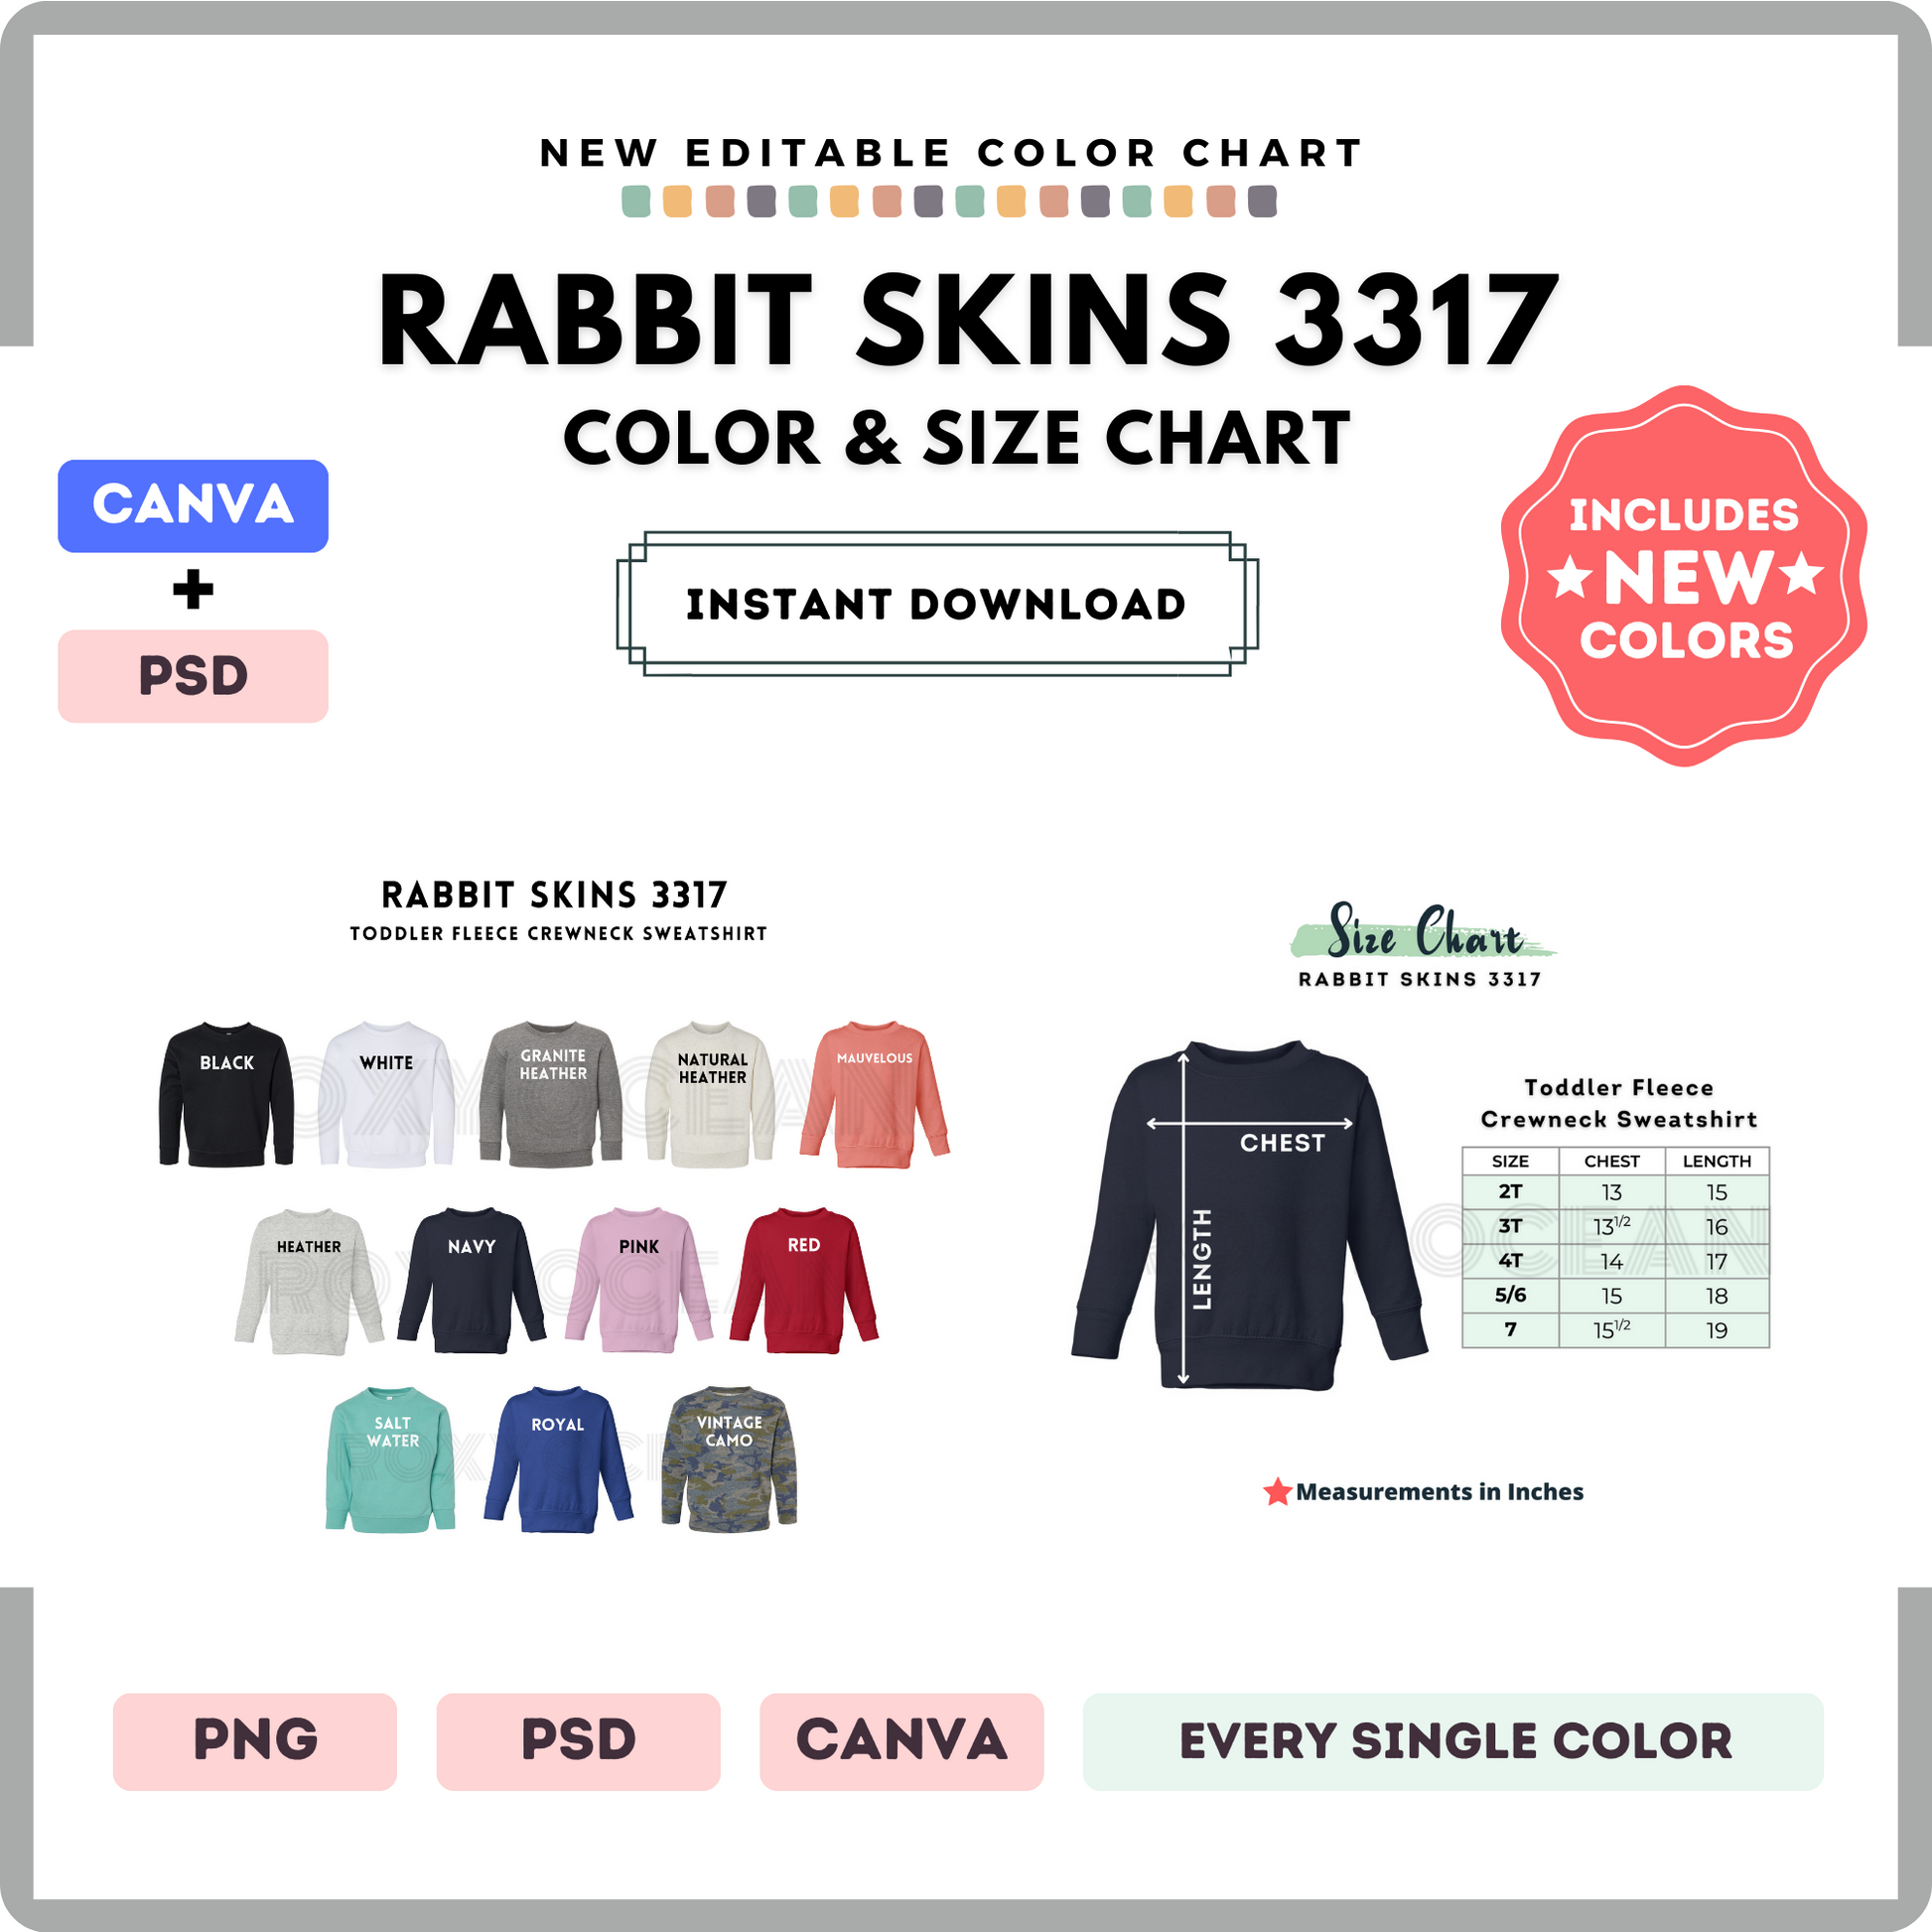 Rabbit Skins 3317 Color and Size Chart